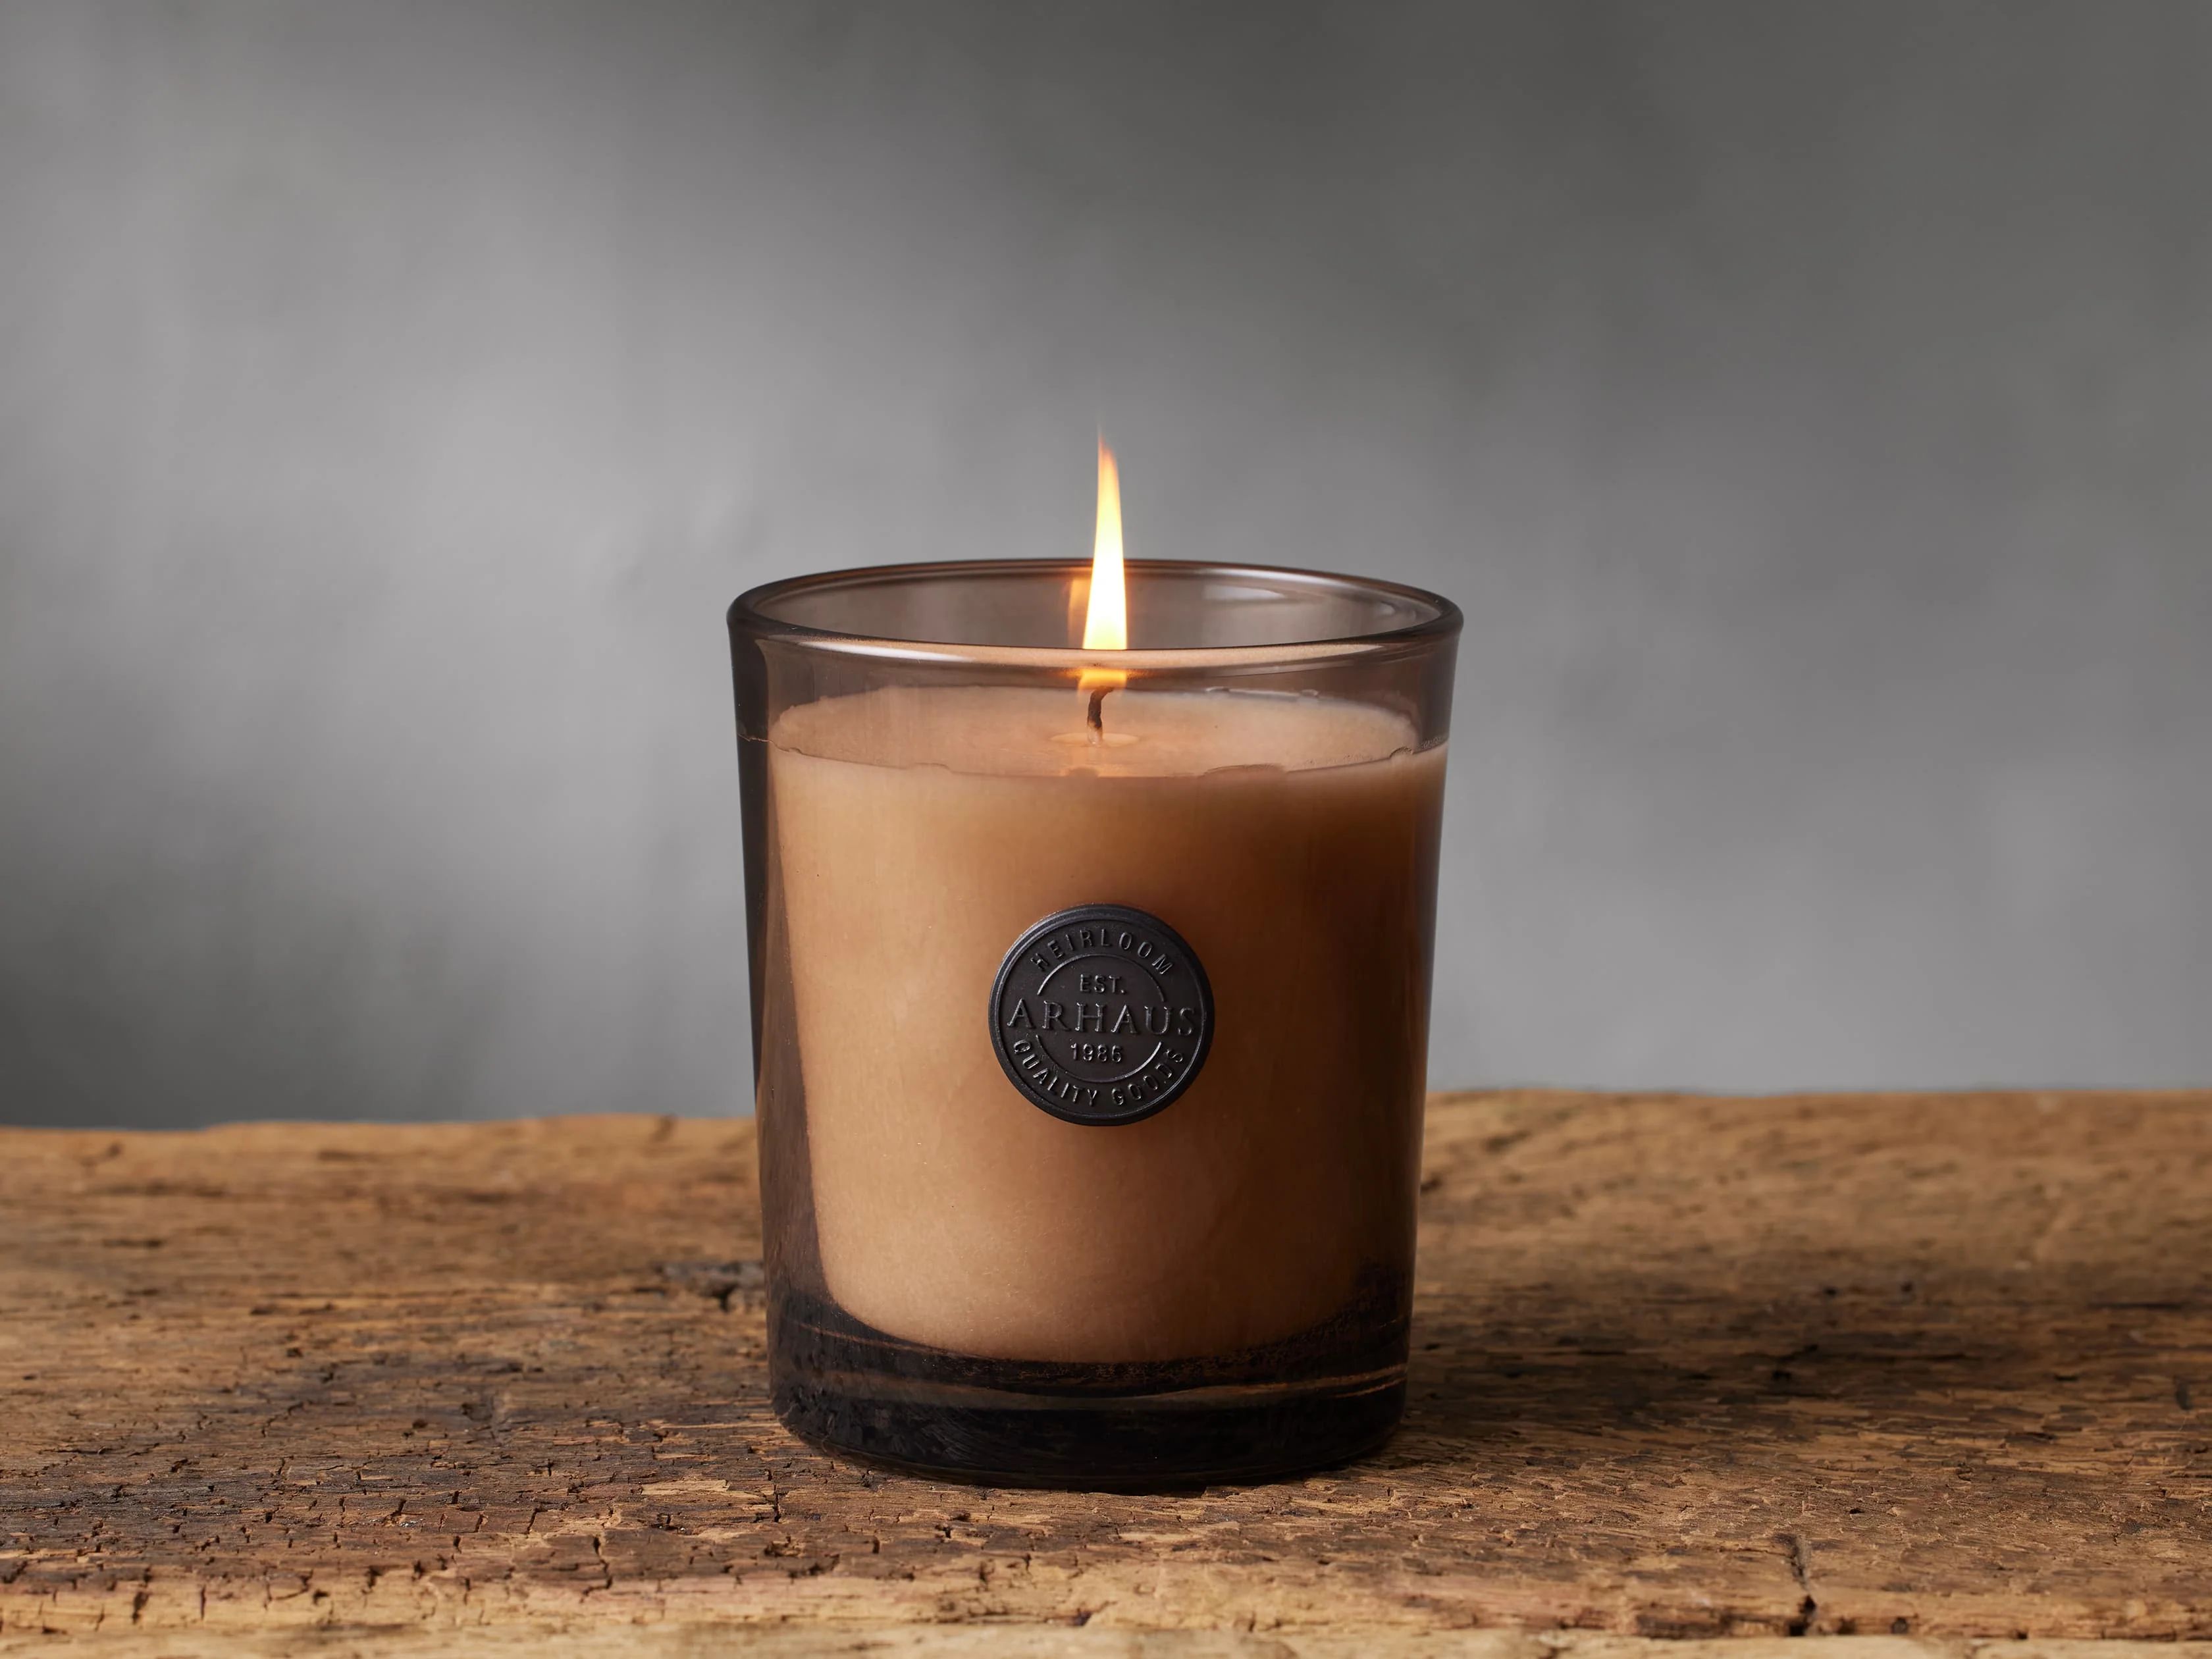 Signature Candle in Sandalwood Leaf and Tobacco | Arhaus